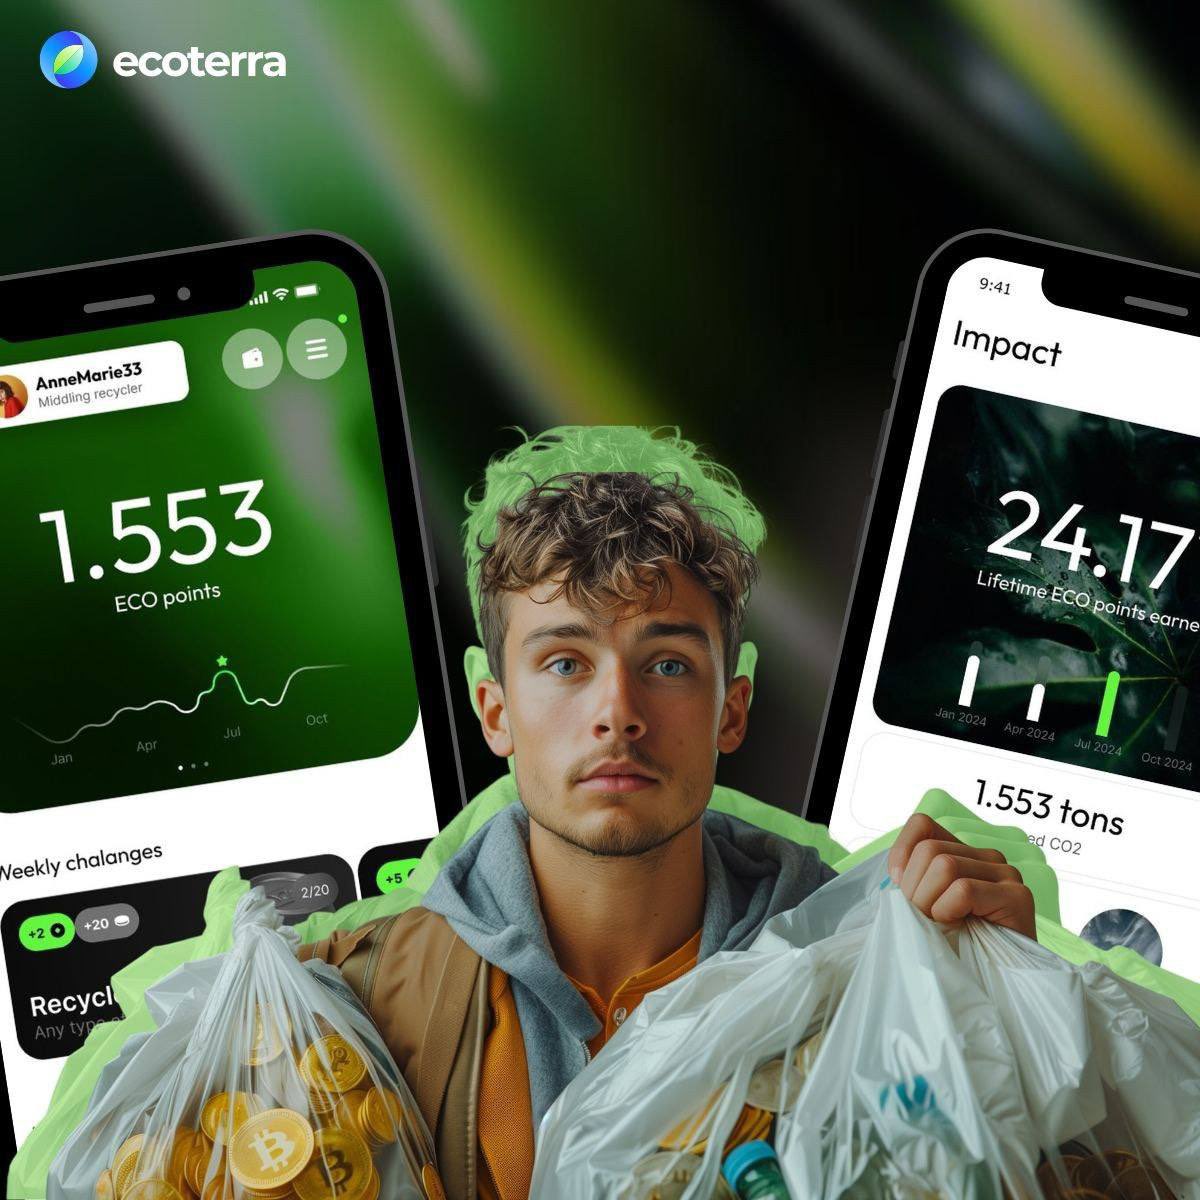 🌎💡 Ecoterra: Invest in Sustainability & Aim for 1B Market Cap! 💡🌎
Ditch the meme coins for ecoterra, where real-world utility meets massive growth potential. Here's why ecoterra is your next smart move:

• MEXC Listing: Ecoterra can now be traded on MEXC
• 1B Market Cap…